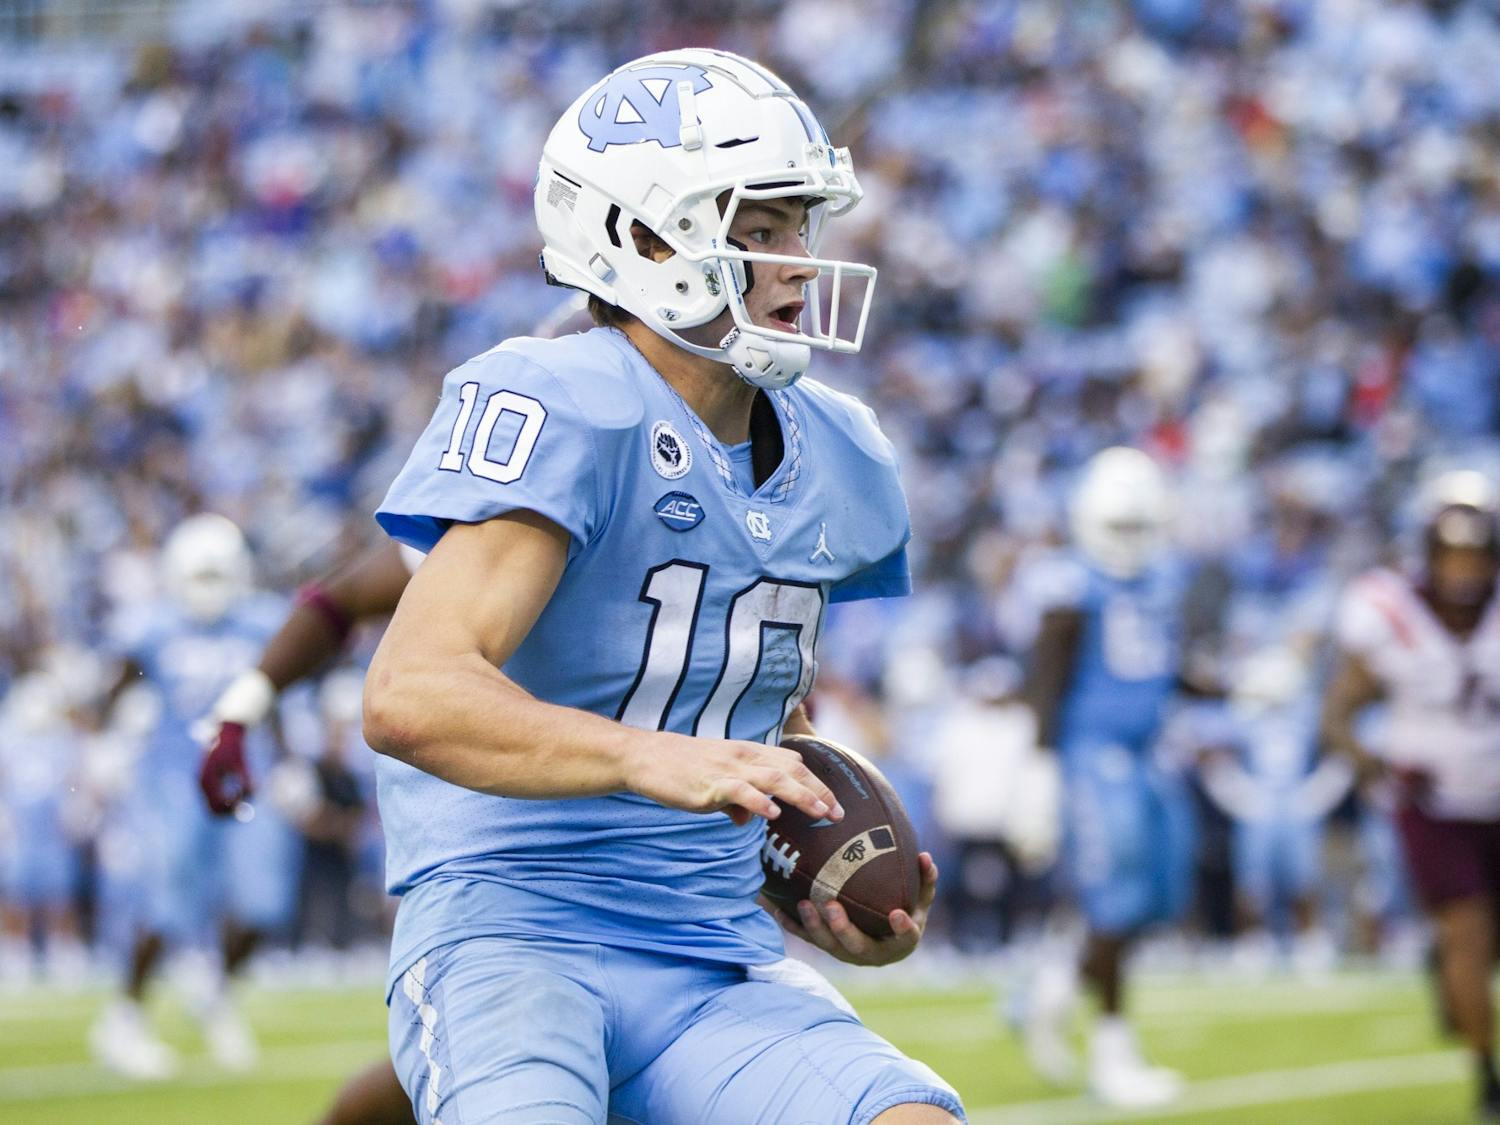 UNC first-year quarterback Drake Maye (10) seeks an open pass during a home football game at Kenan Stadium against Virginia Tech on Saturday, Oct. 1, 2022. UNC won 41-10.